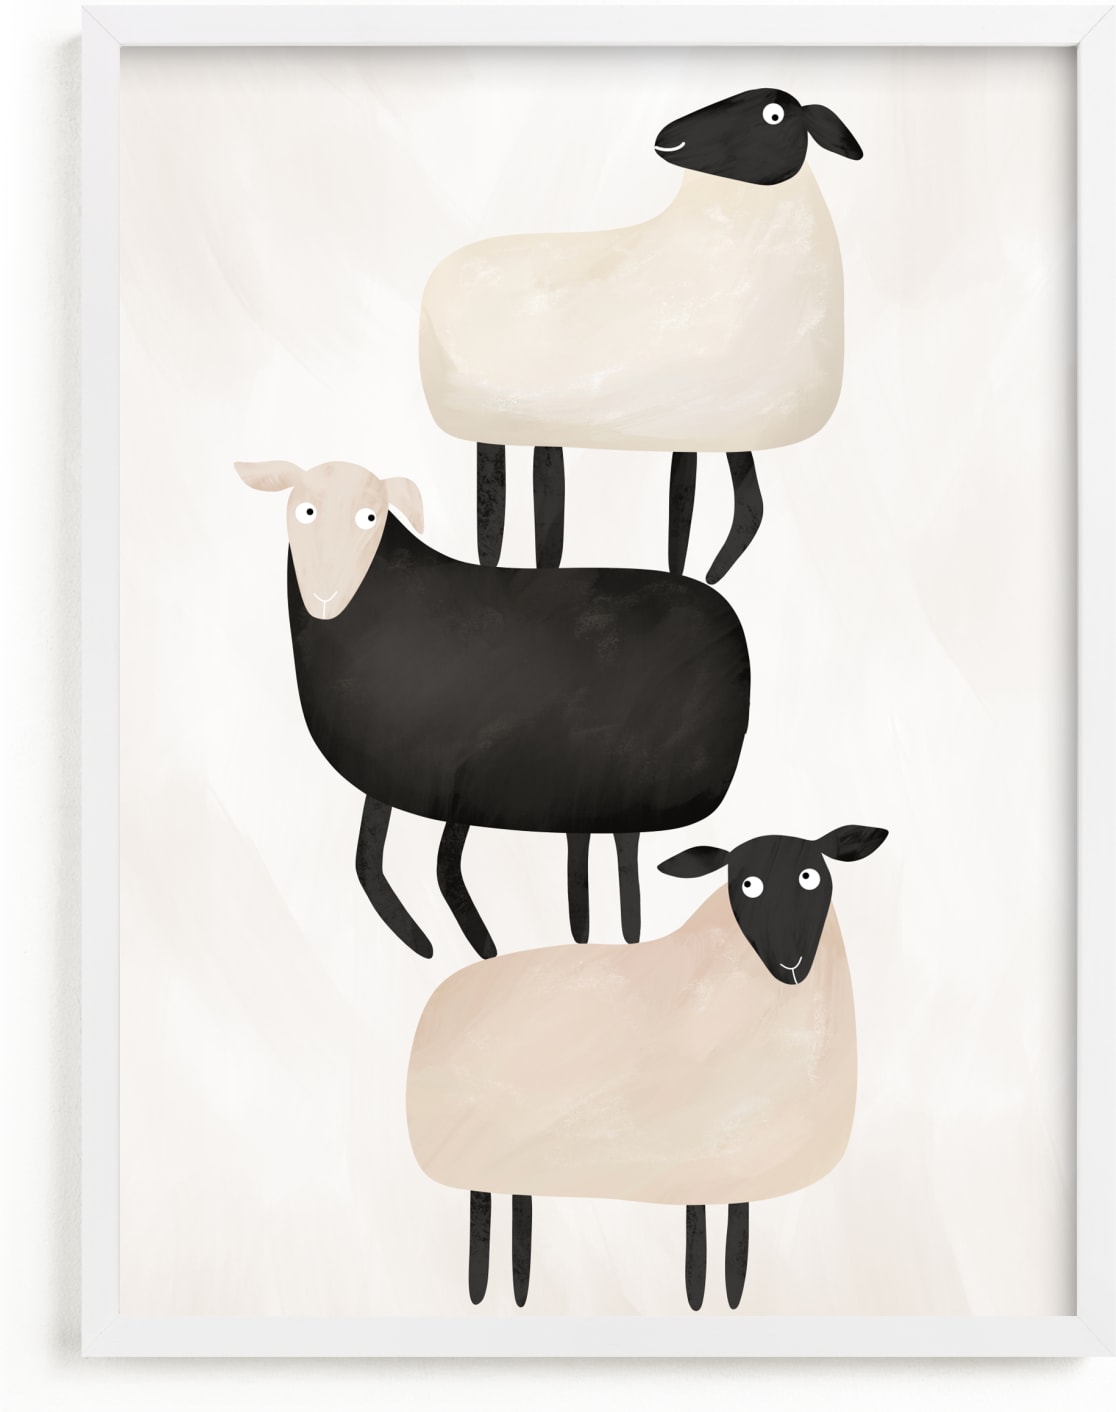 This is a white nursery wall art by Maja Cunningham called I got your back.